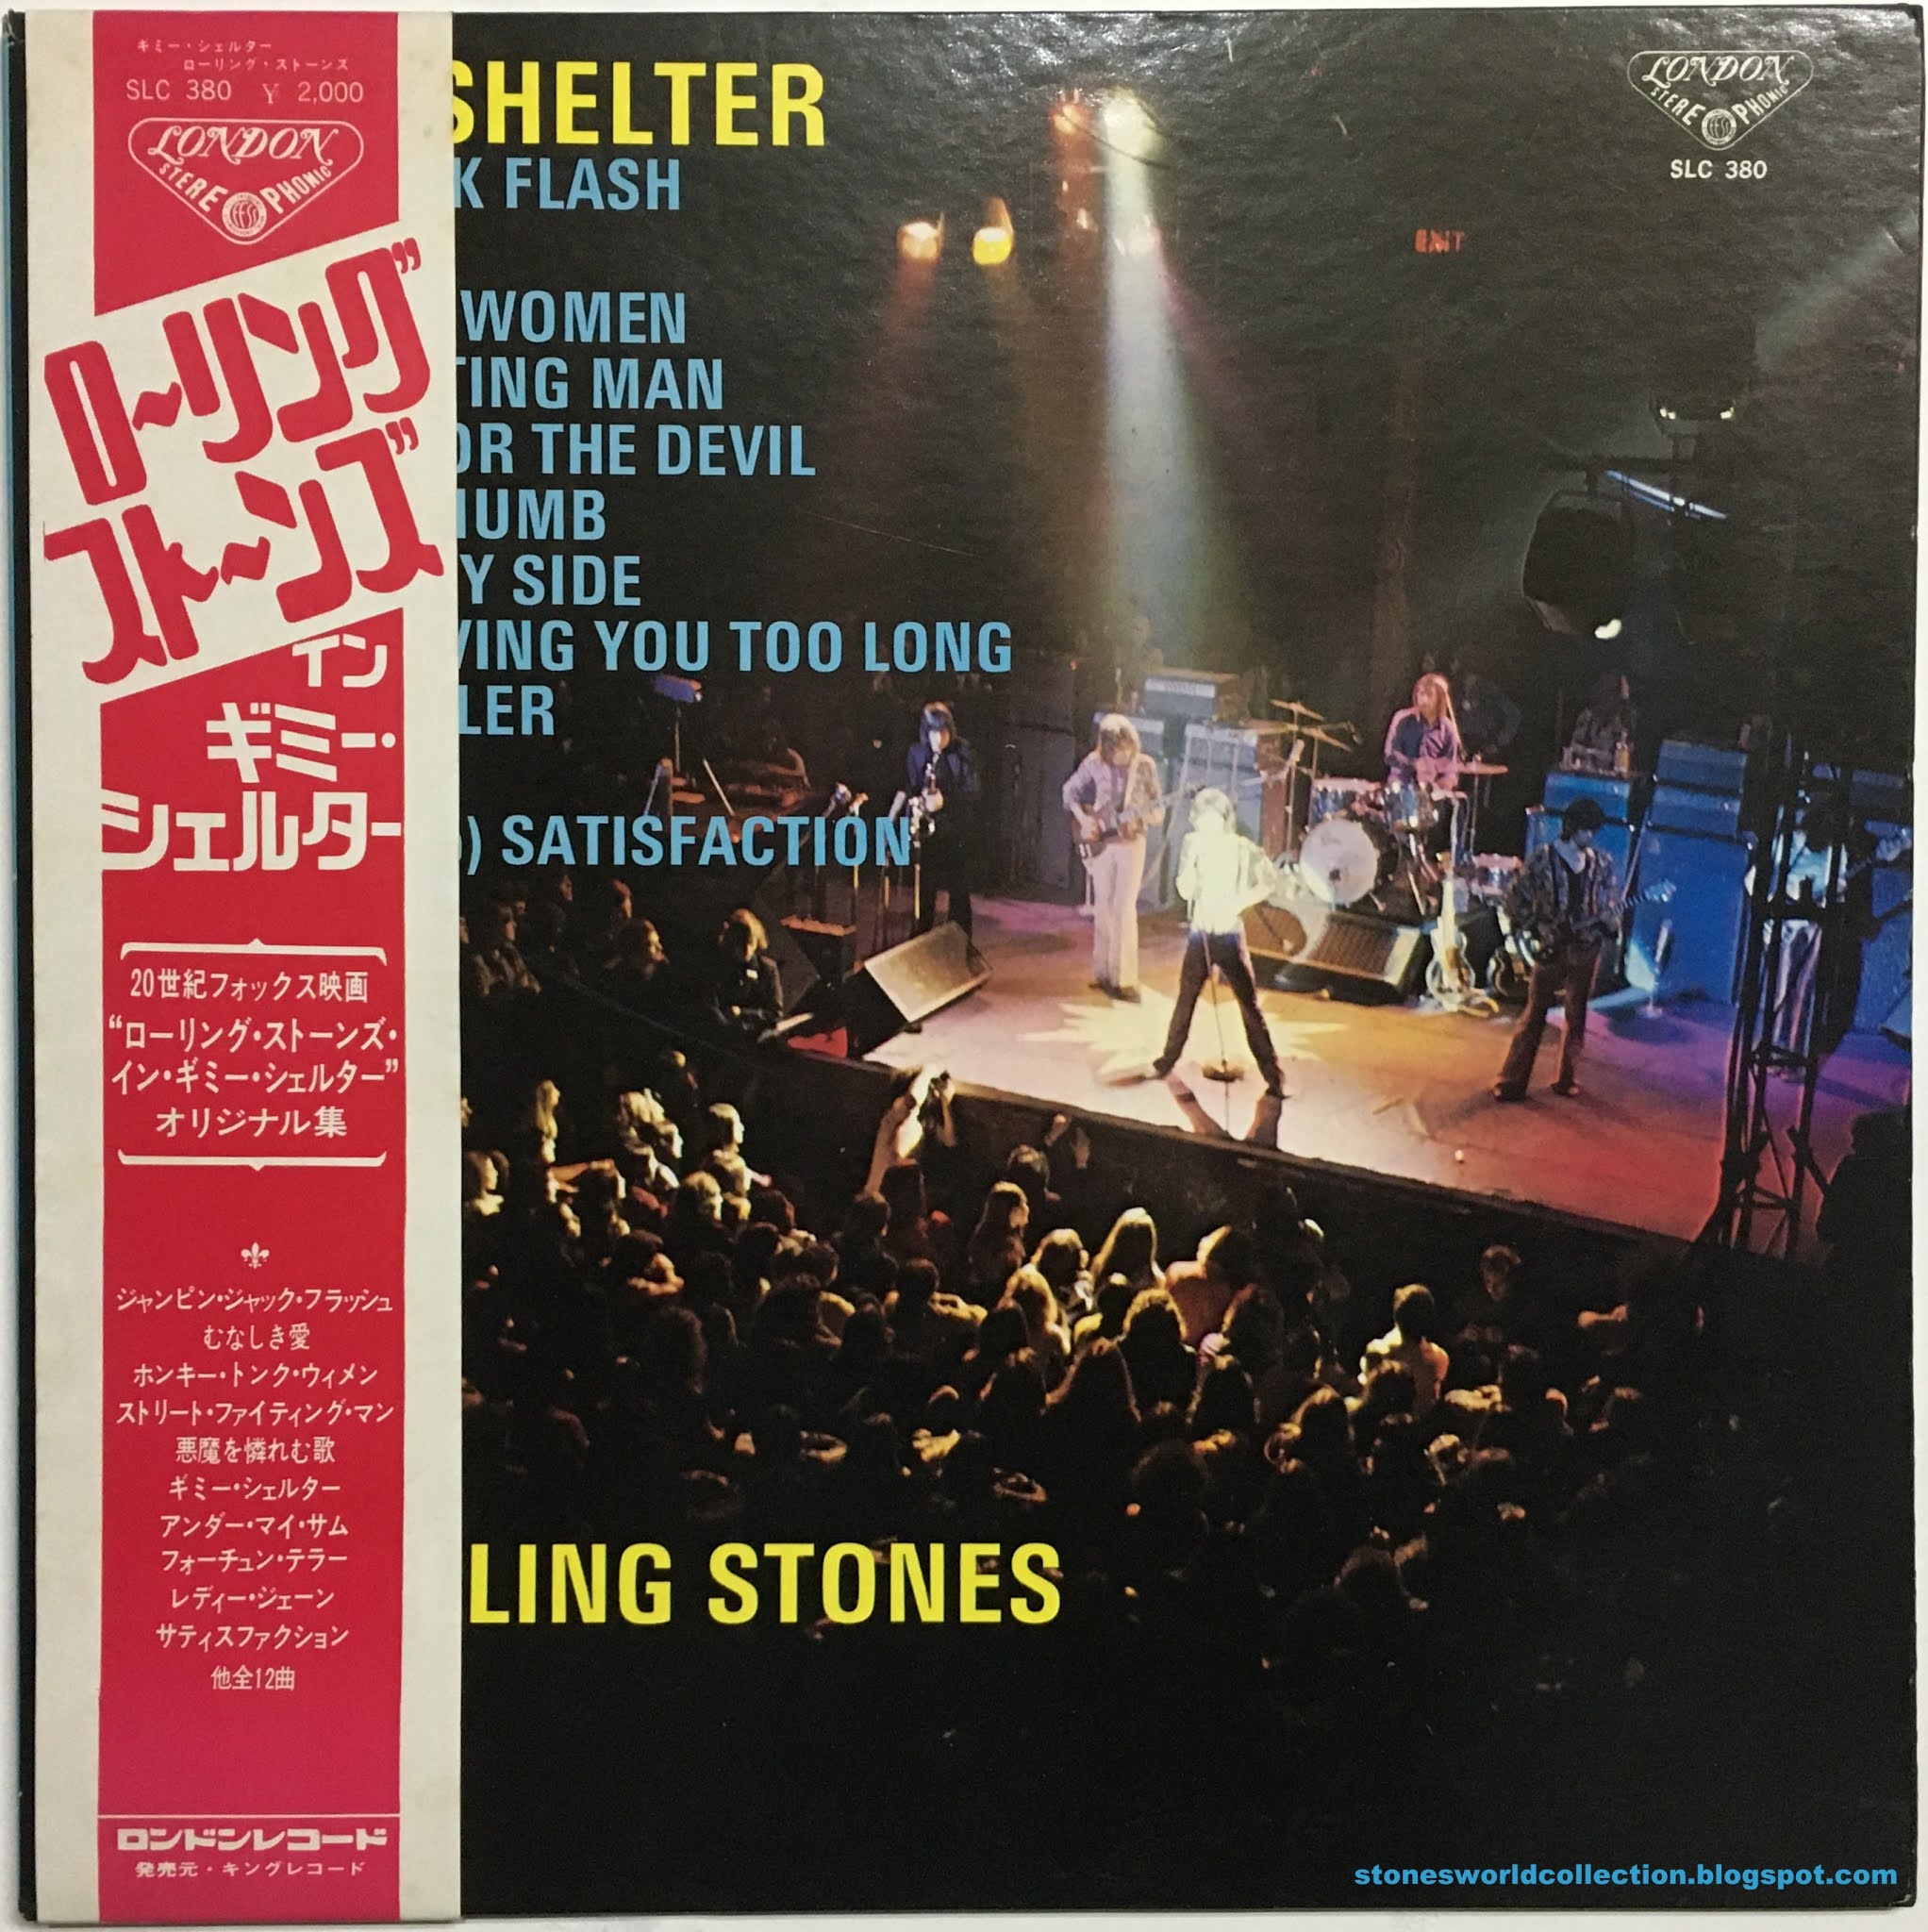 Stones gimme shelter. Rolling Stones - Gimme Shelter VHS. Rolling Stones "Gimme Shelter". The j. geils Band - must of got Lost.